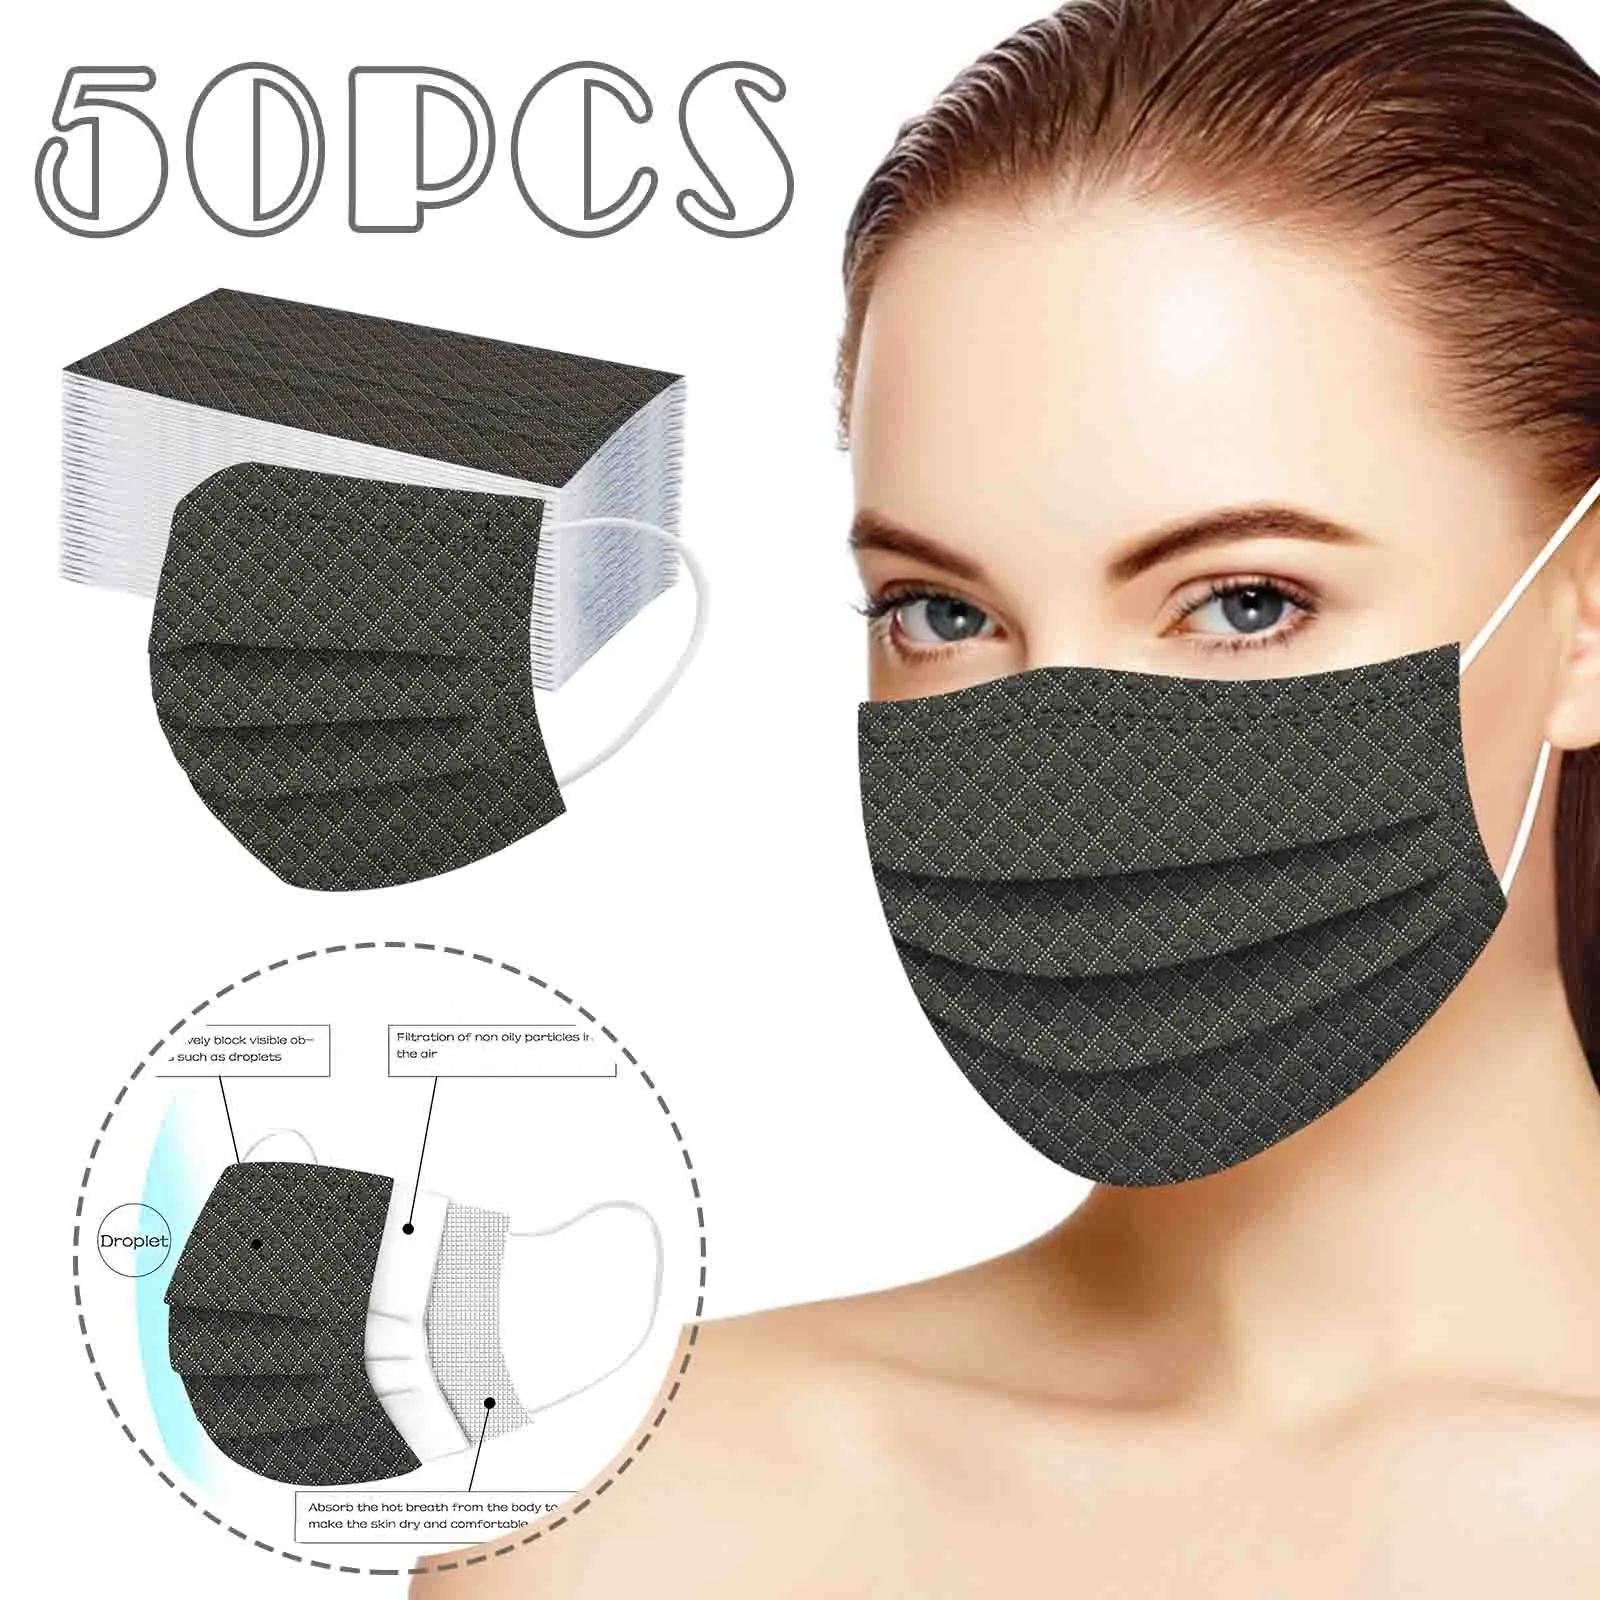 halloween costumes for adults 50pcs Adult Solid Plaid Shade Disposable Face Mask 3 Ply Earloop Masks Halloween Cosplay Маска Для Лица Masque Visage Mascaras all black halloween costumes